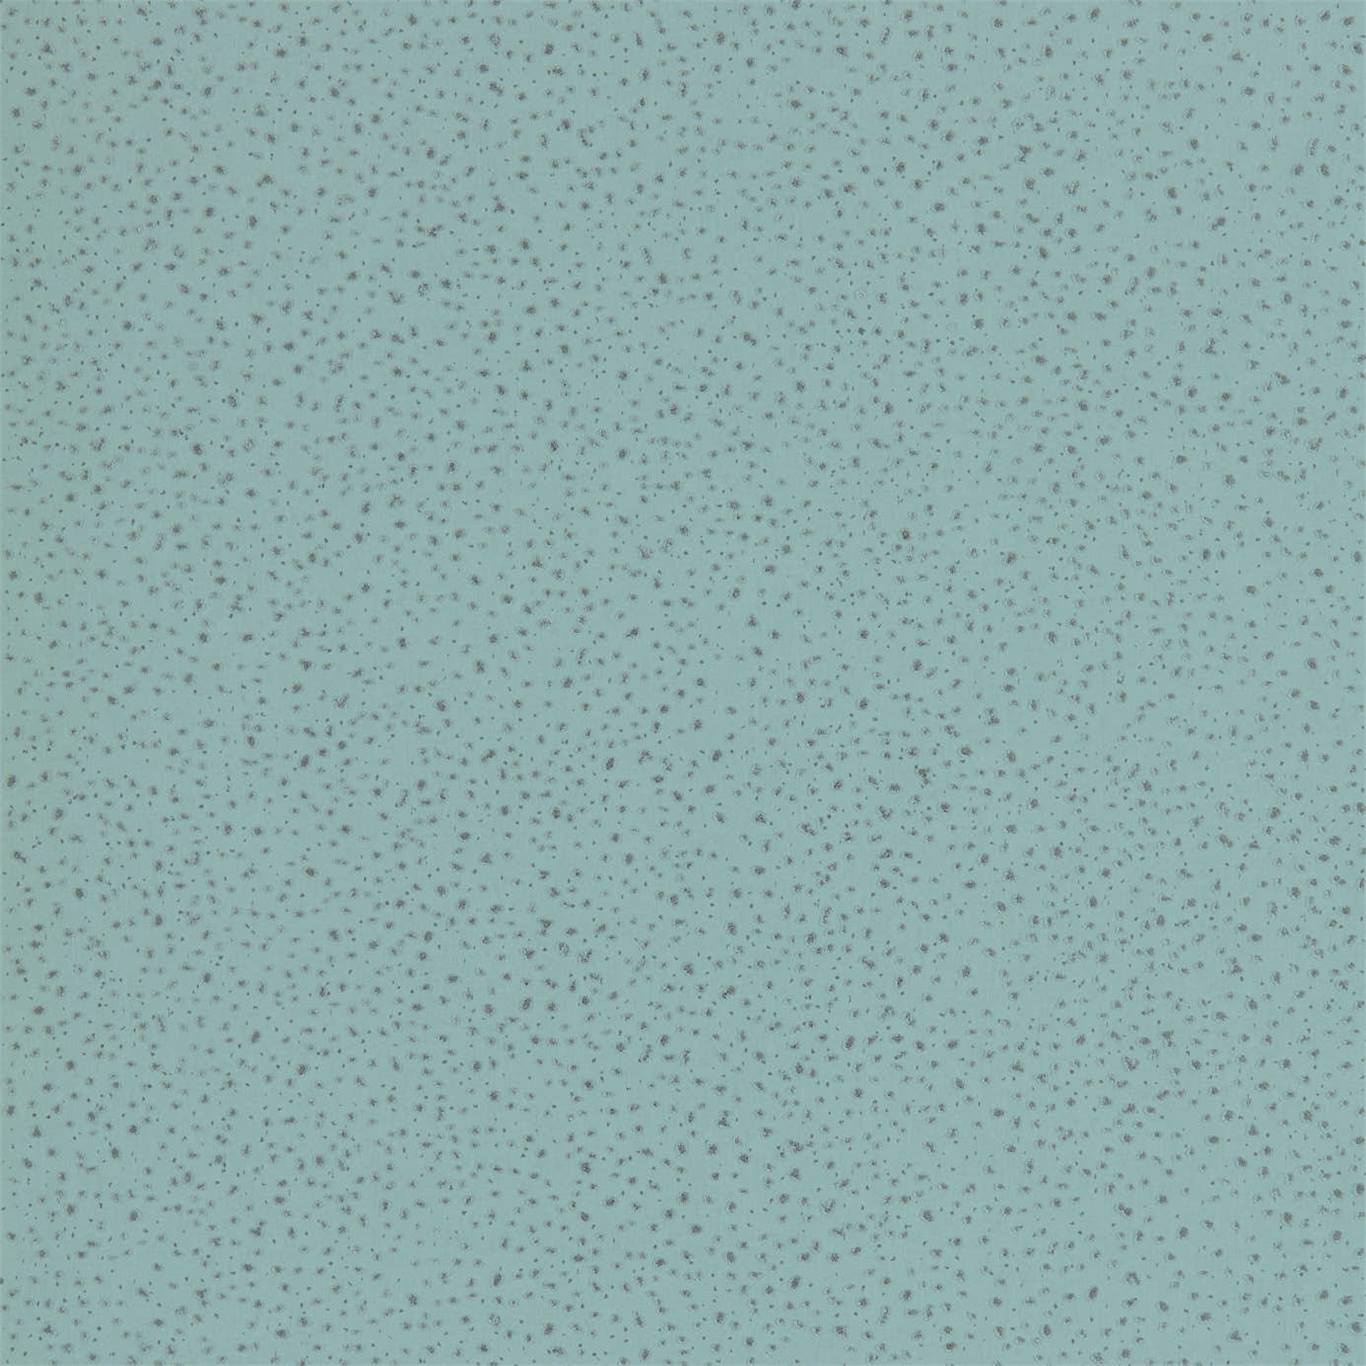 Foxy Blue Shell Wallpaper EANW112593 by Harlequin